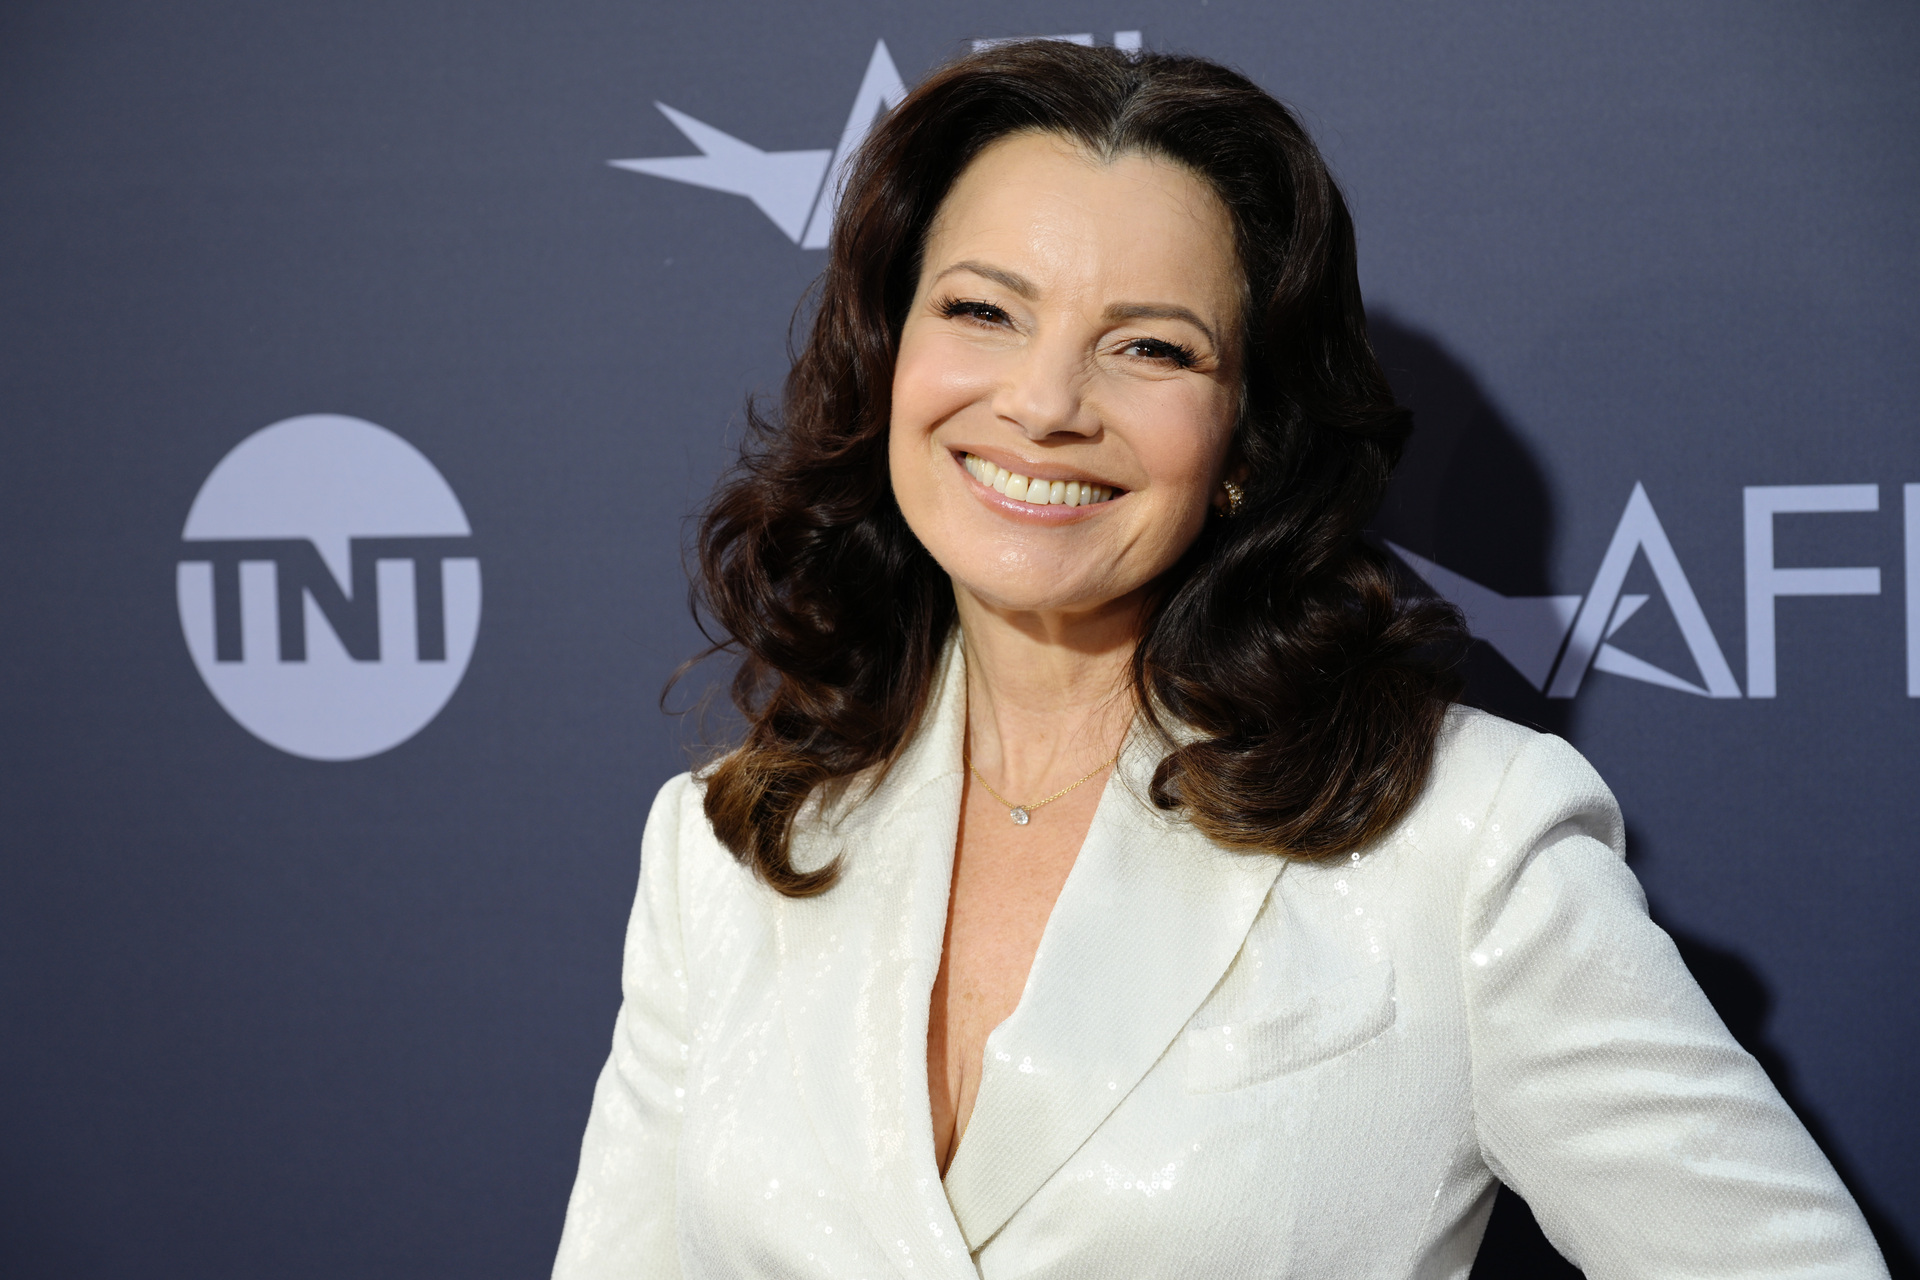 Fran Drescher and the cast of 'The Nanny' Where are they now?